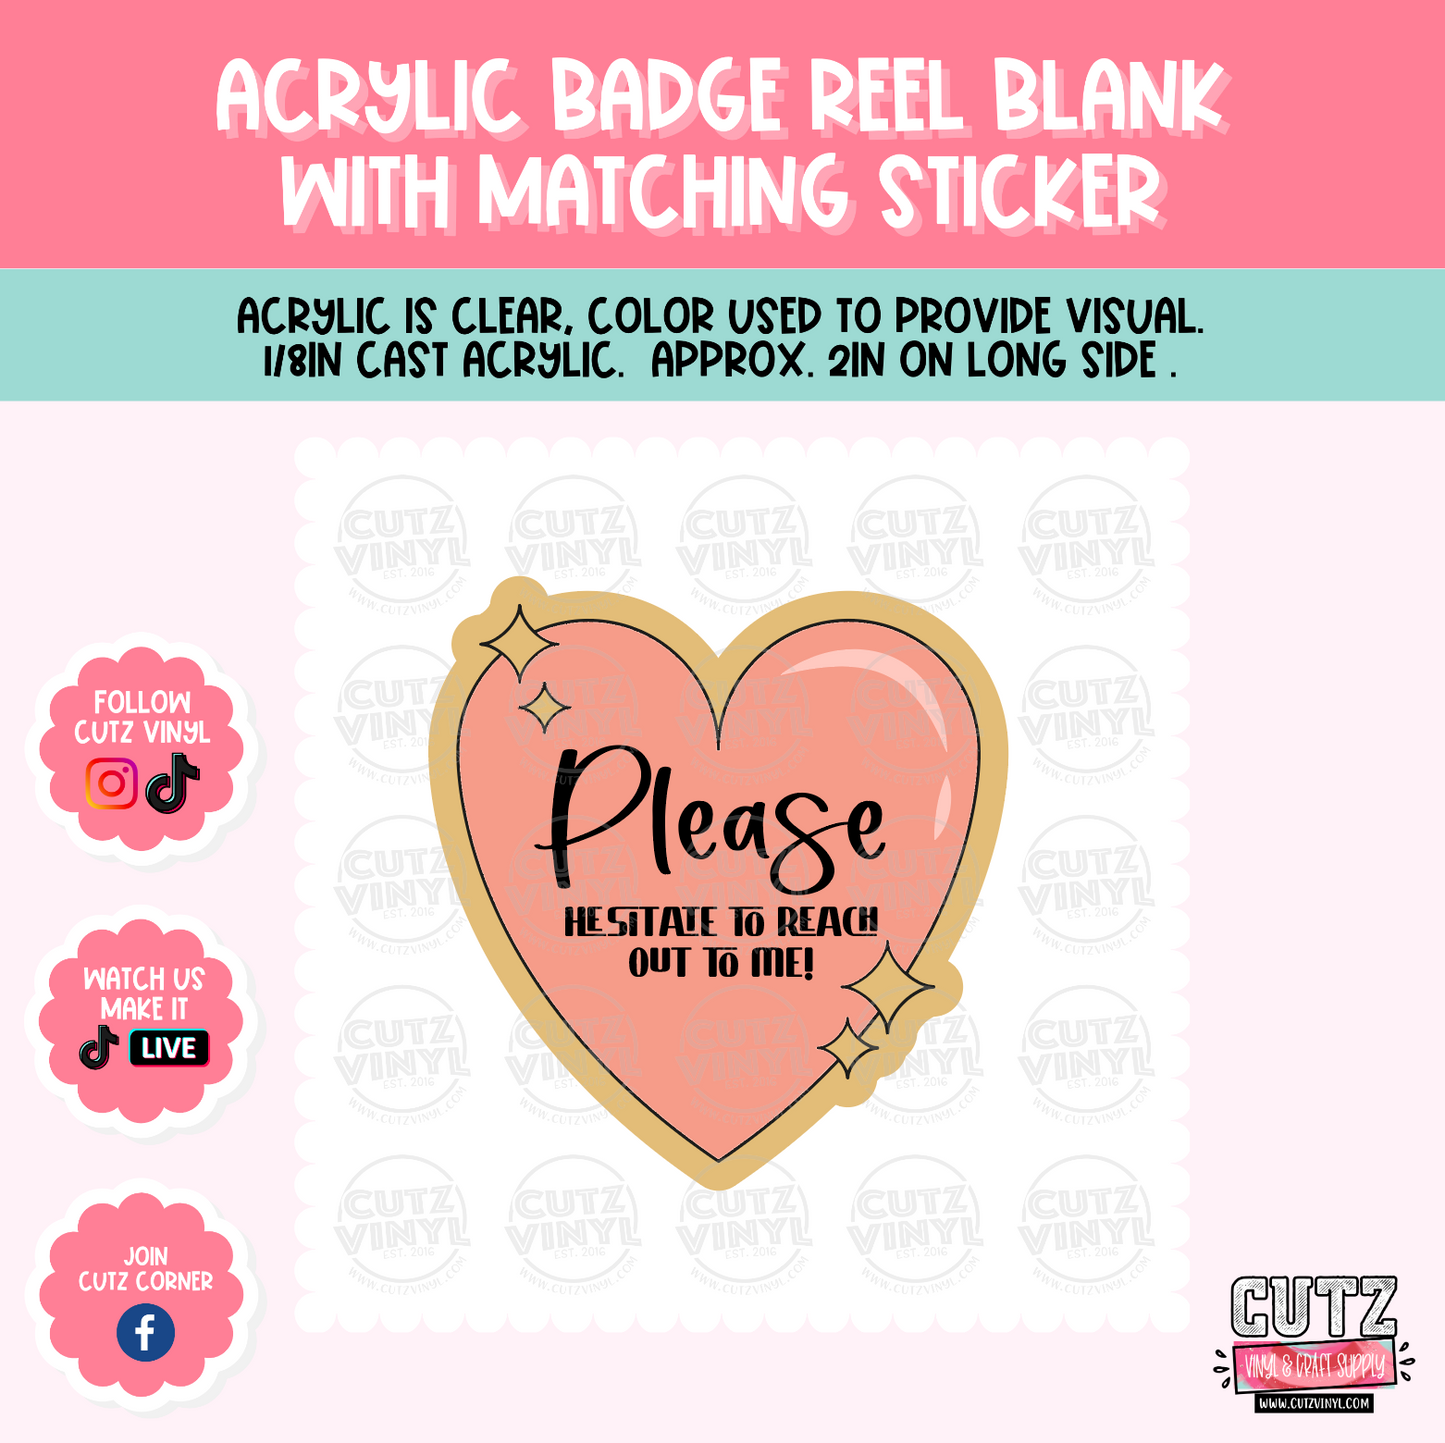 Please Hesitate - Acrylic Badge Reel Blank and Matching Sticker